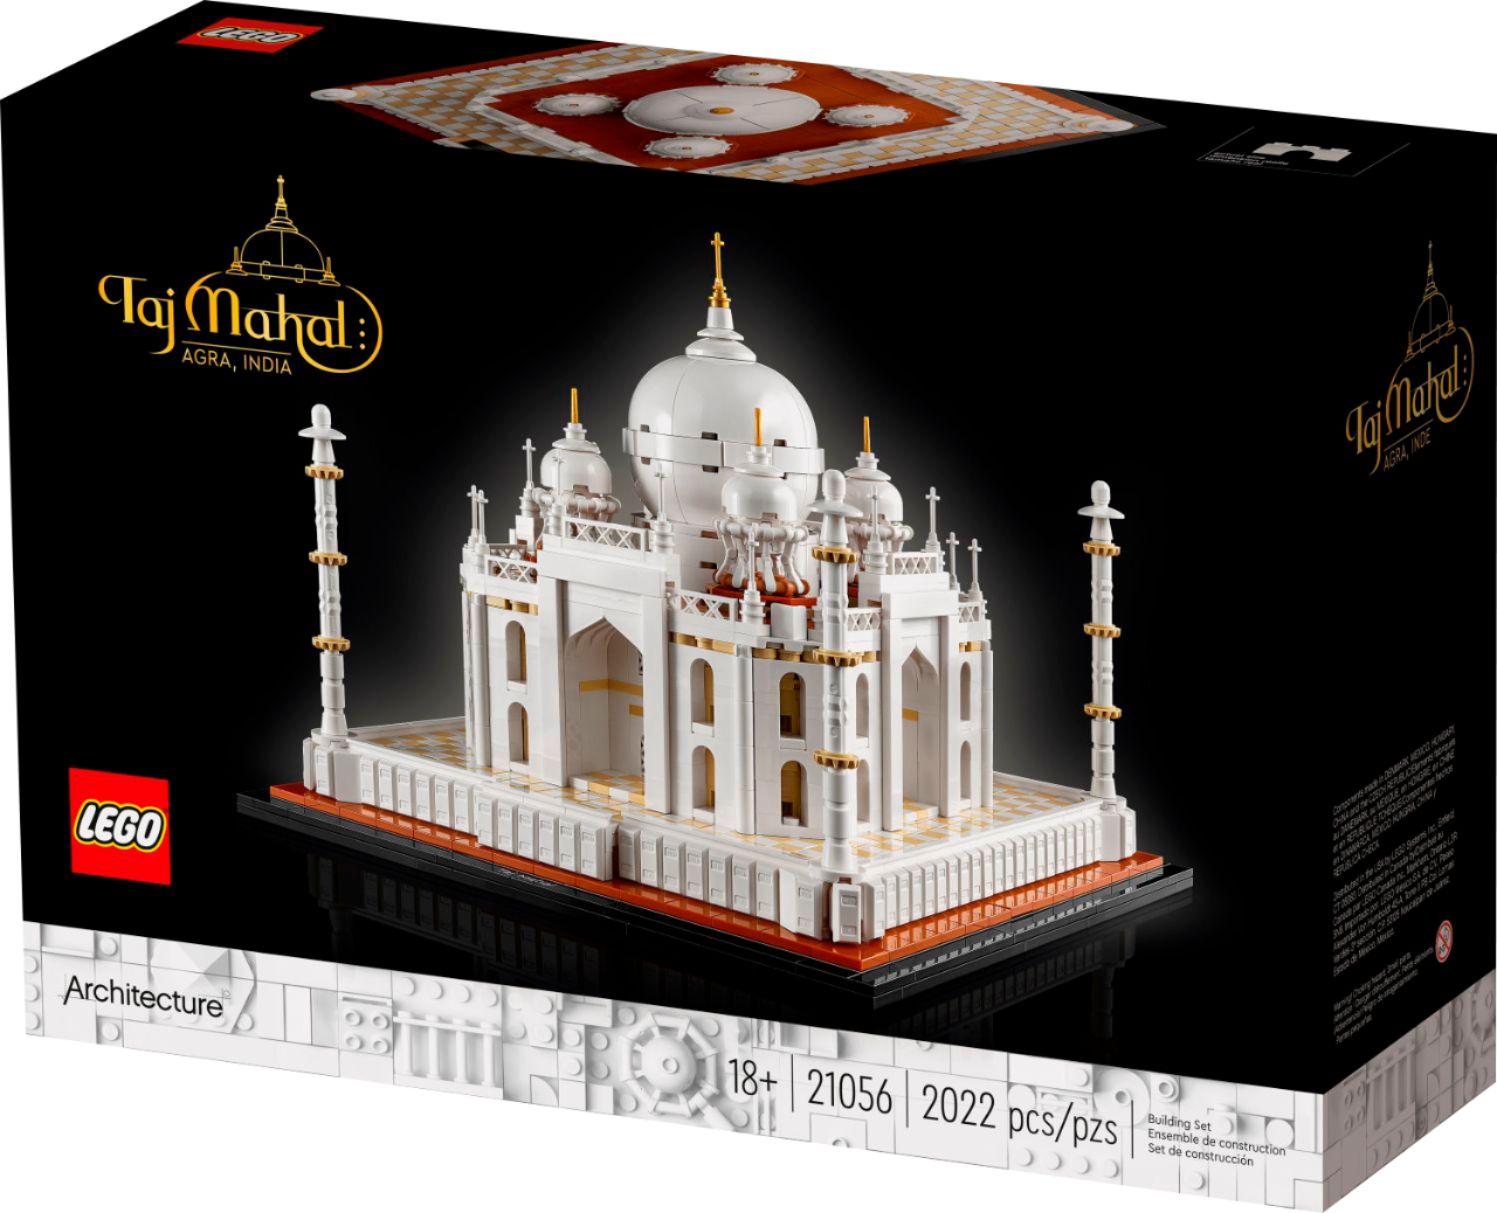  LEGO Architecture Taj Mahal 21056 Building Set - Landmarks  Collection, Display Model, Collectible Home Décor Gift Idea and Model Kits  for Adults and Architects to Build : Toys & Games